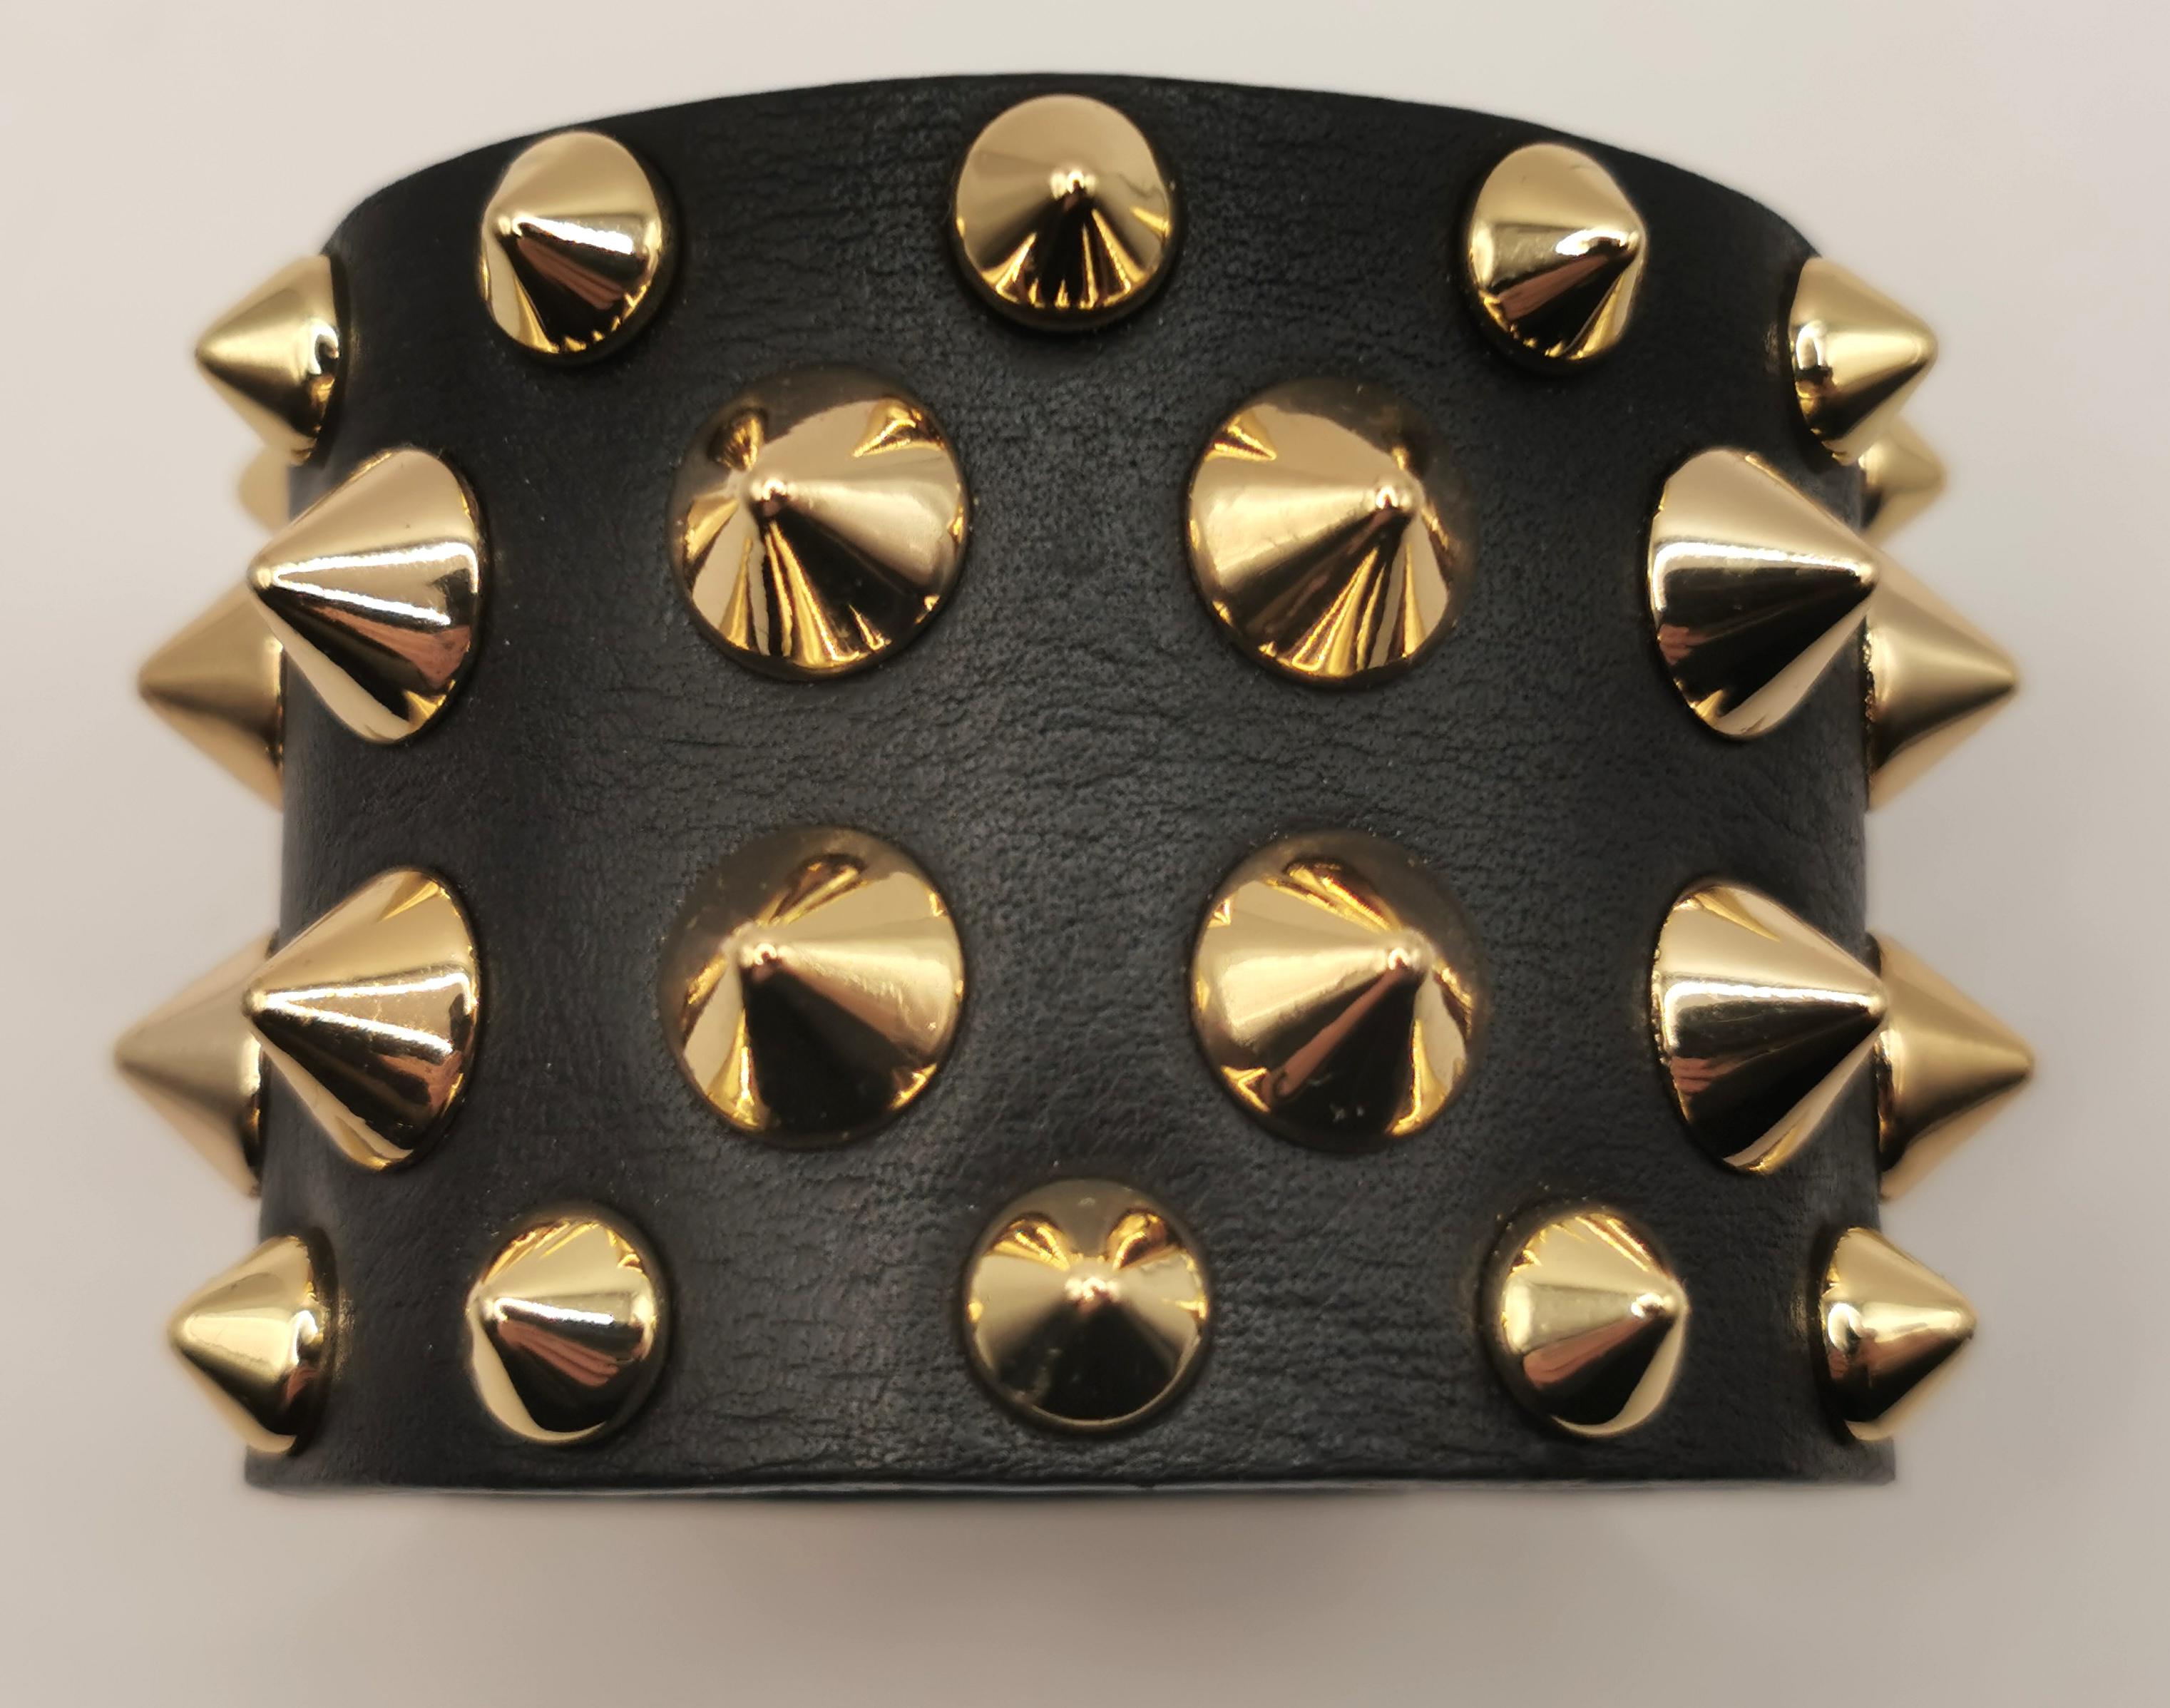 Women's or Men's Balmain studded leather cuff bracelet, black and gold 